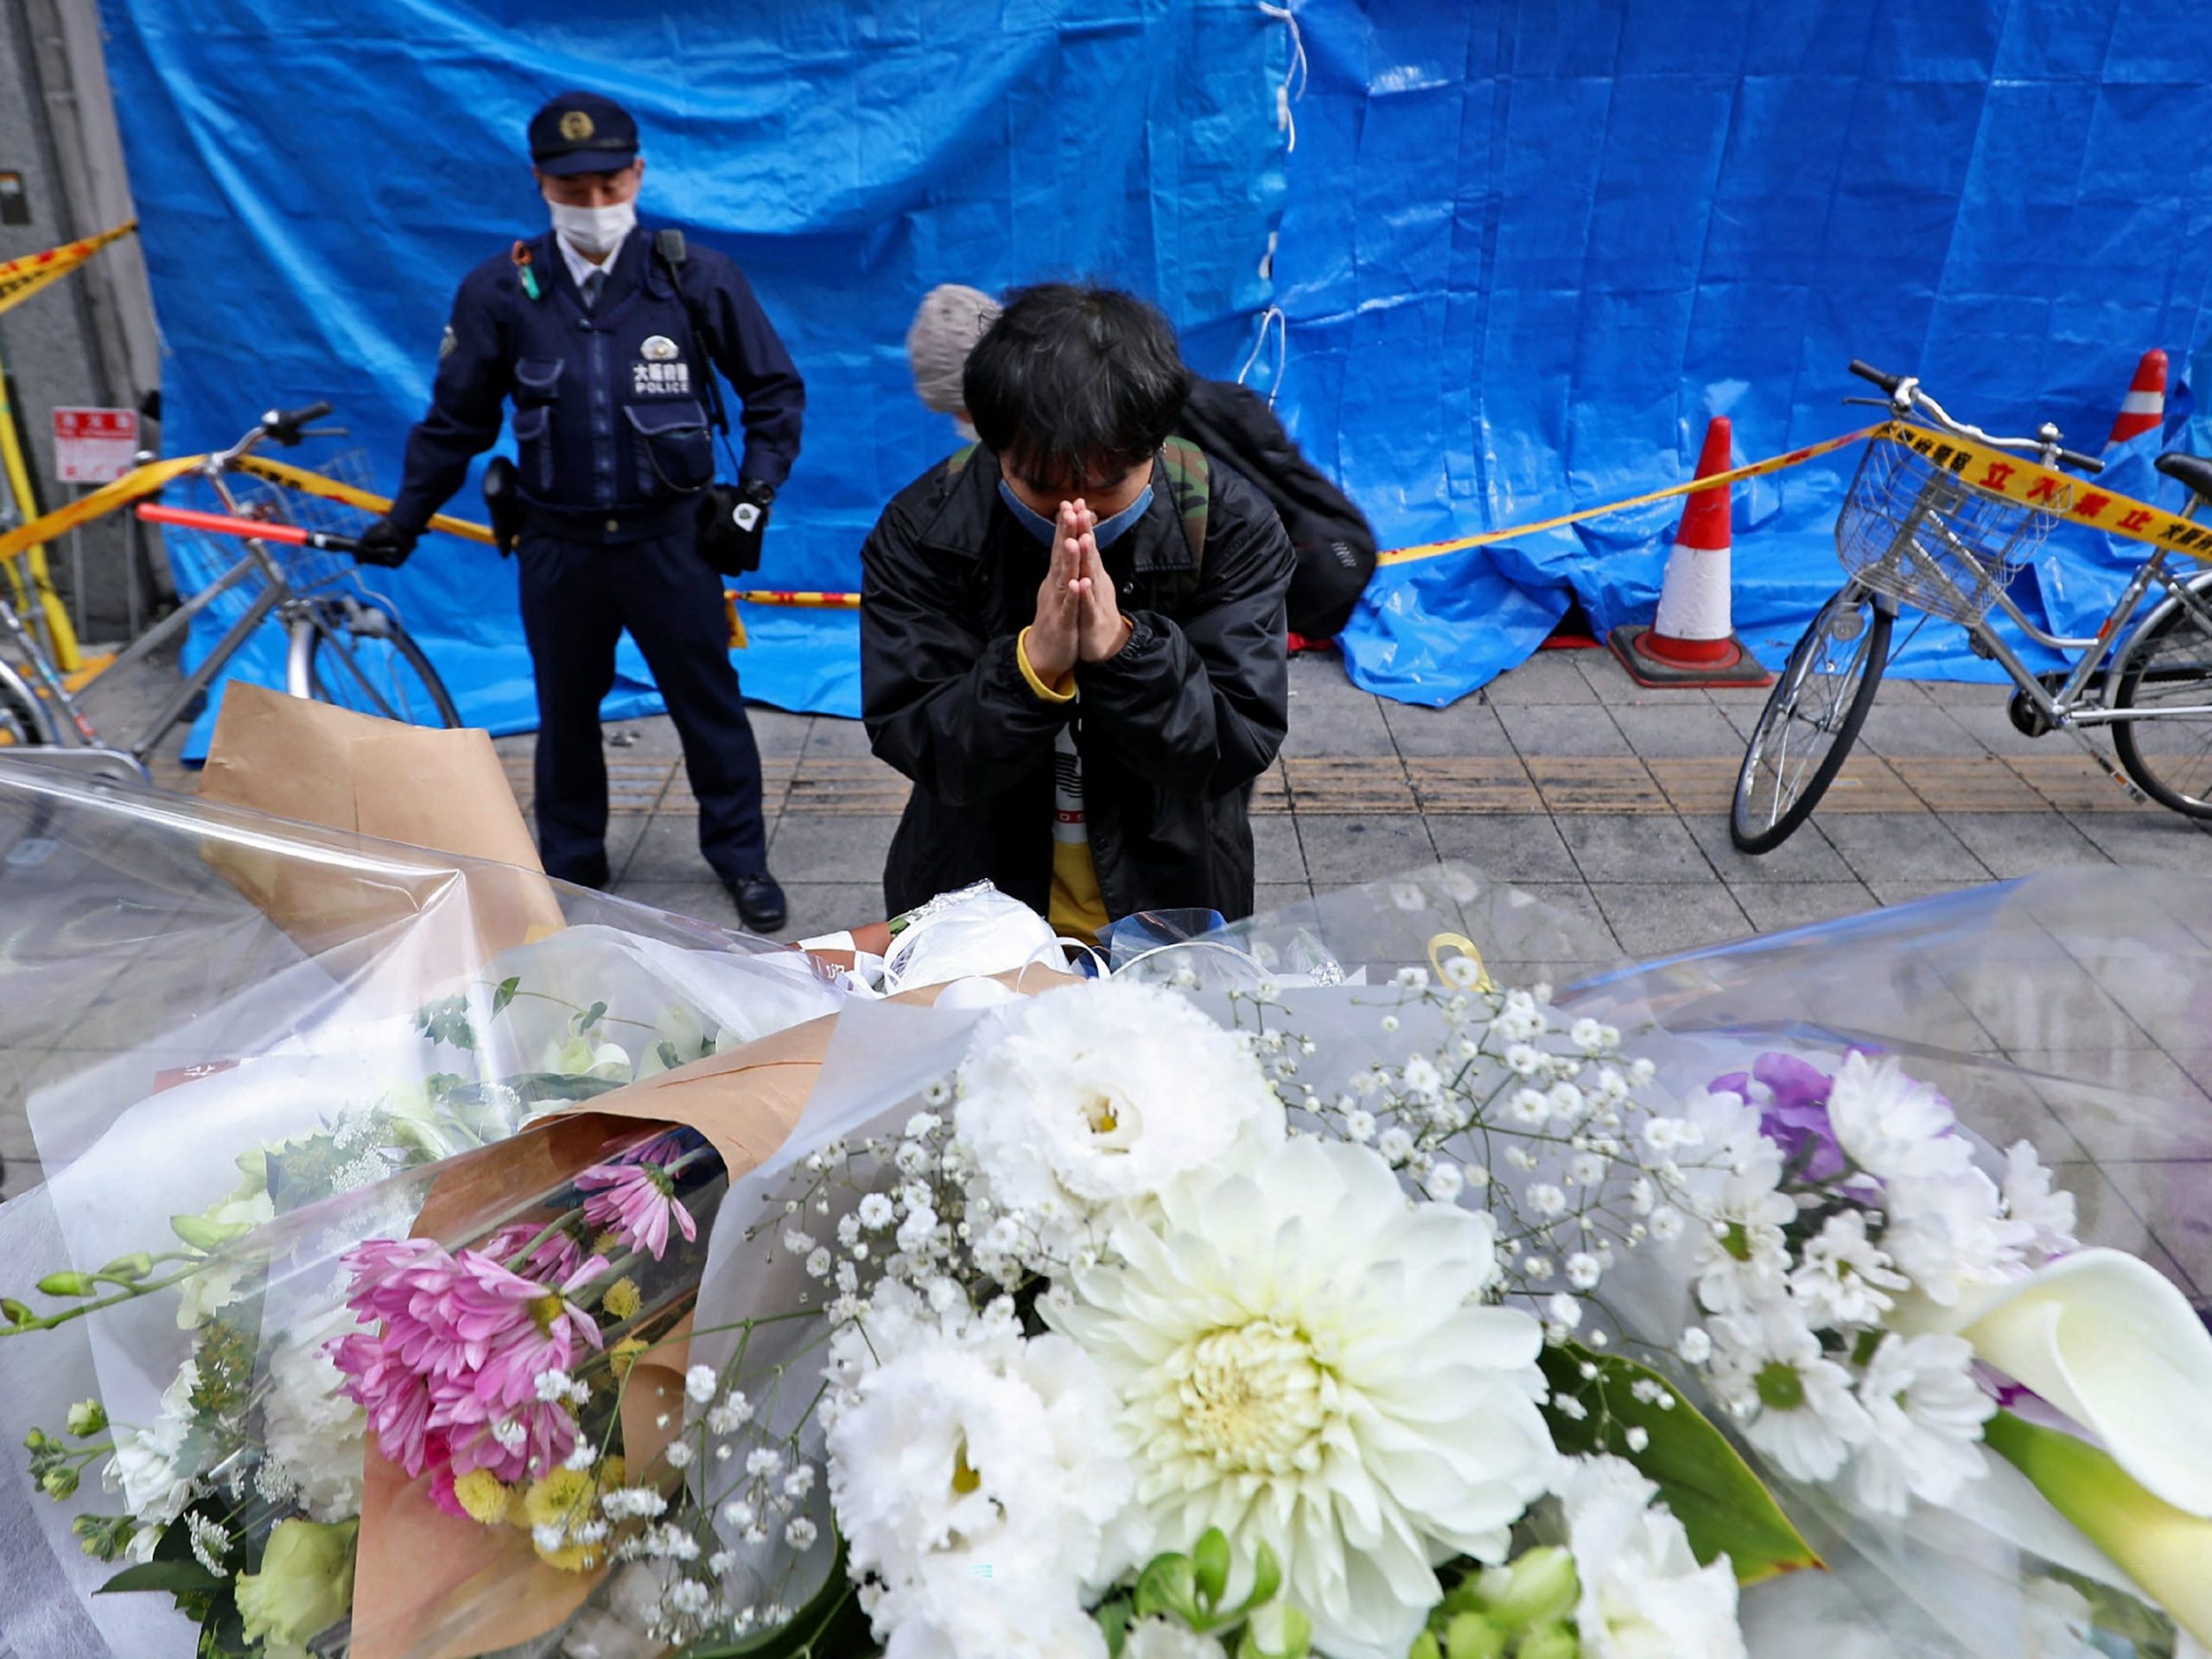 A man prays for victims in front of an office building, where a fire broke out the previous day, in Osaka on December 18, 2021.